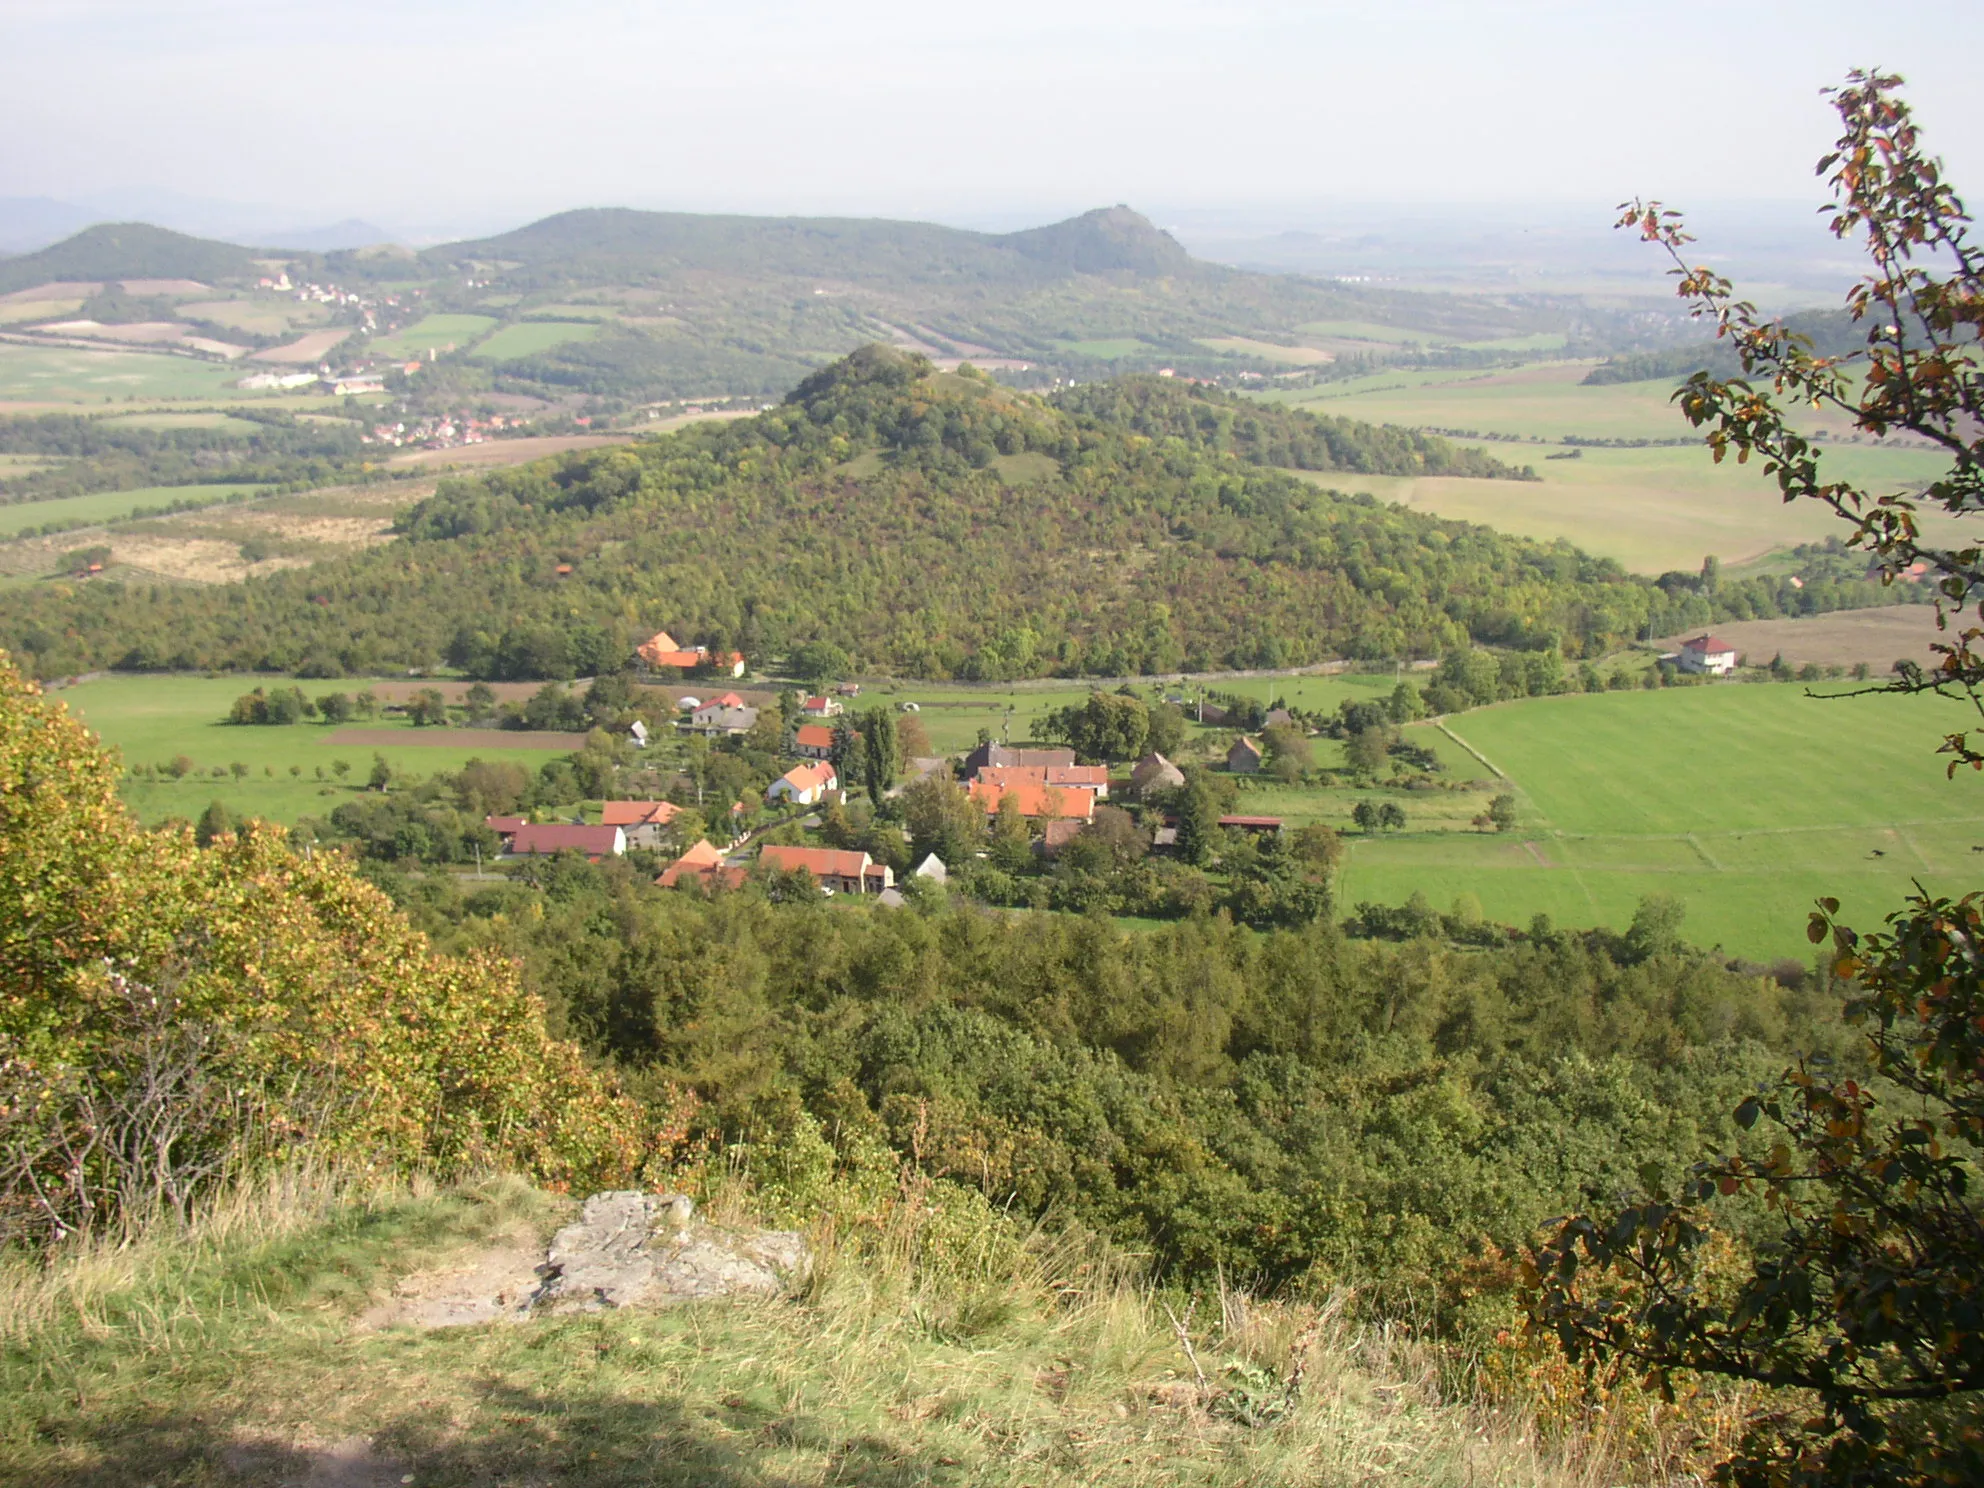 Photo showing: View from ruins of Oltařík Castle in České středohoří Mts. towards east. In the foreground village of Děkovka with hill of Plešivec (477 m) beyond it. On the horizon slightly right off the centre there is hill of Košťál (aka Košťálov, 481 m) with another castle ruin and in the left hill of Sutomský vrch (505 m) with villages of Sutom on its slopes and Vlastislav at foothill..